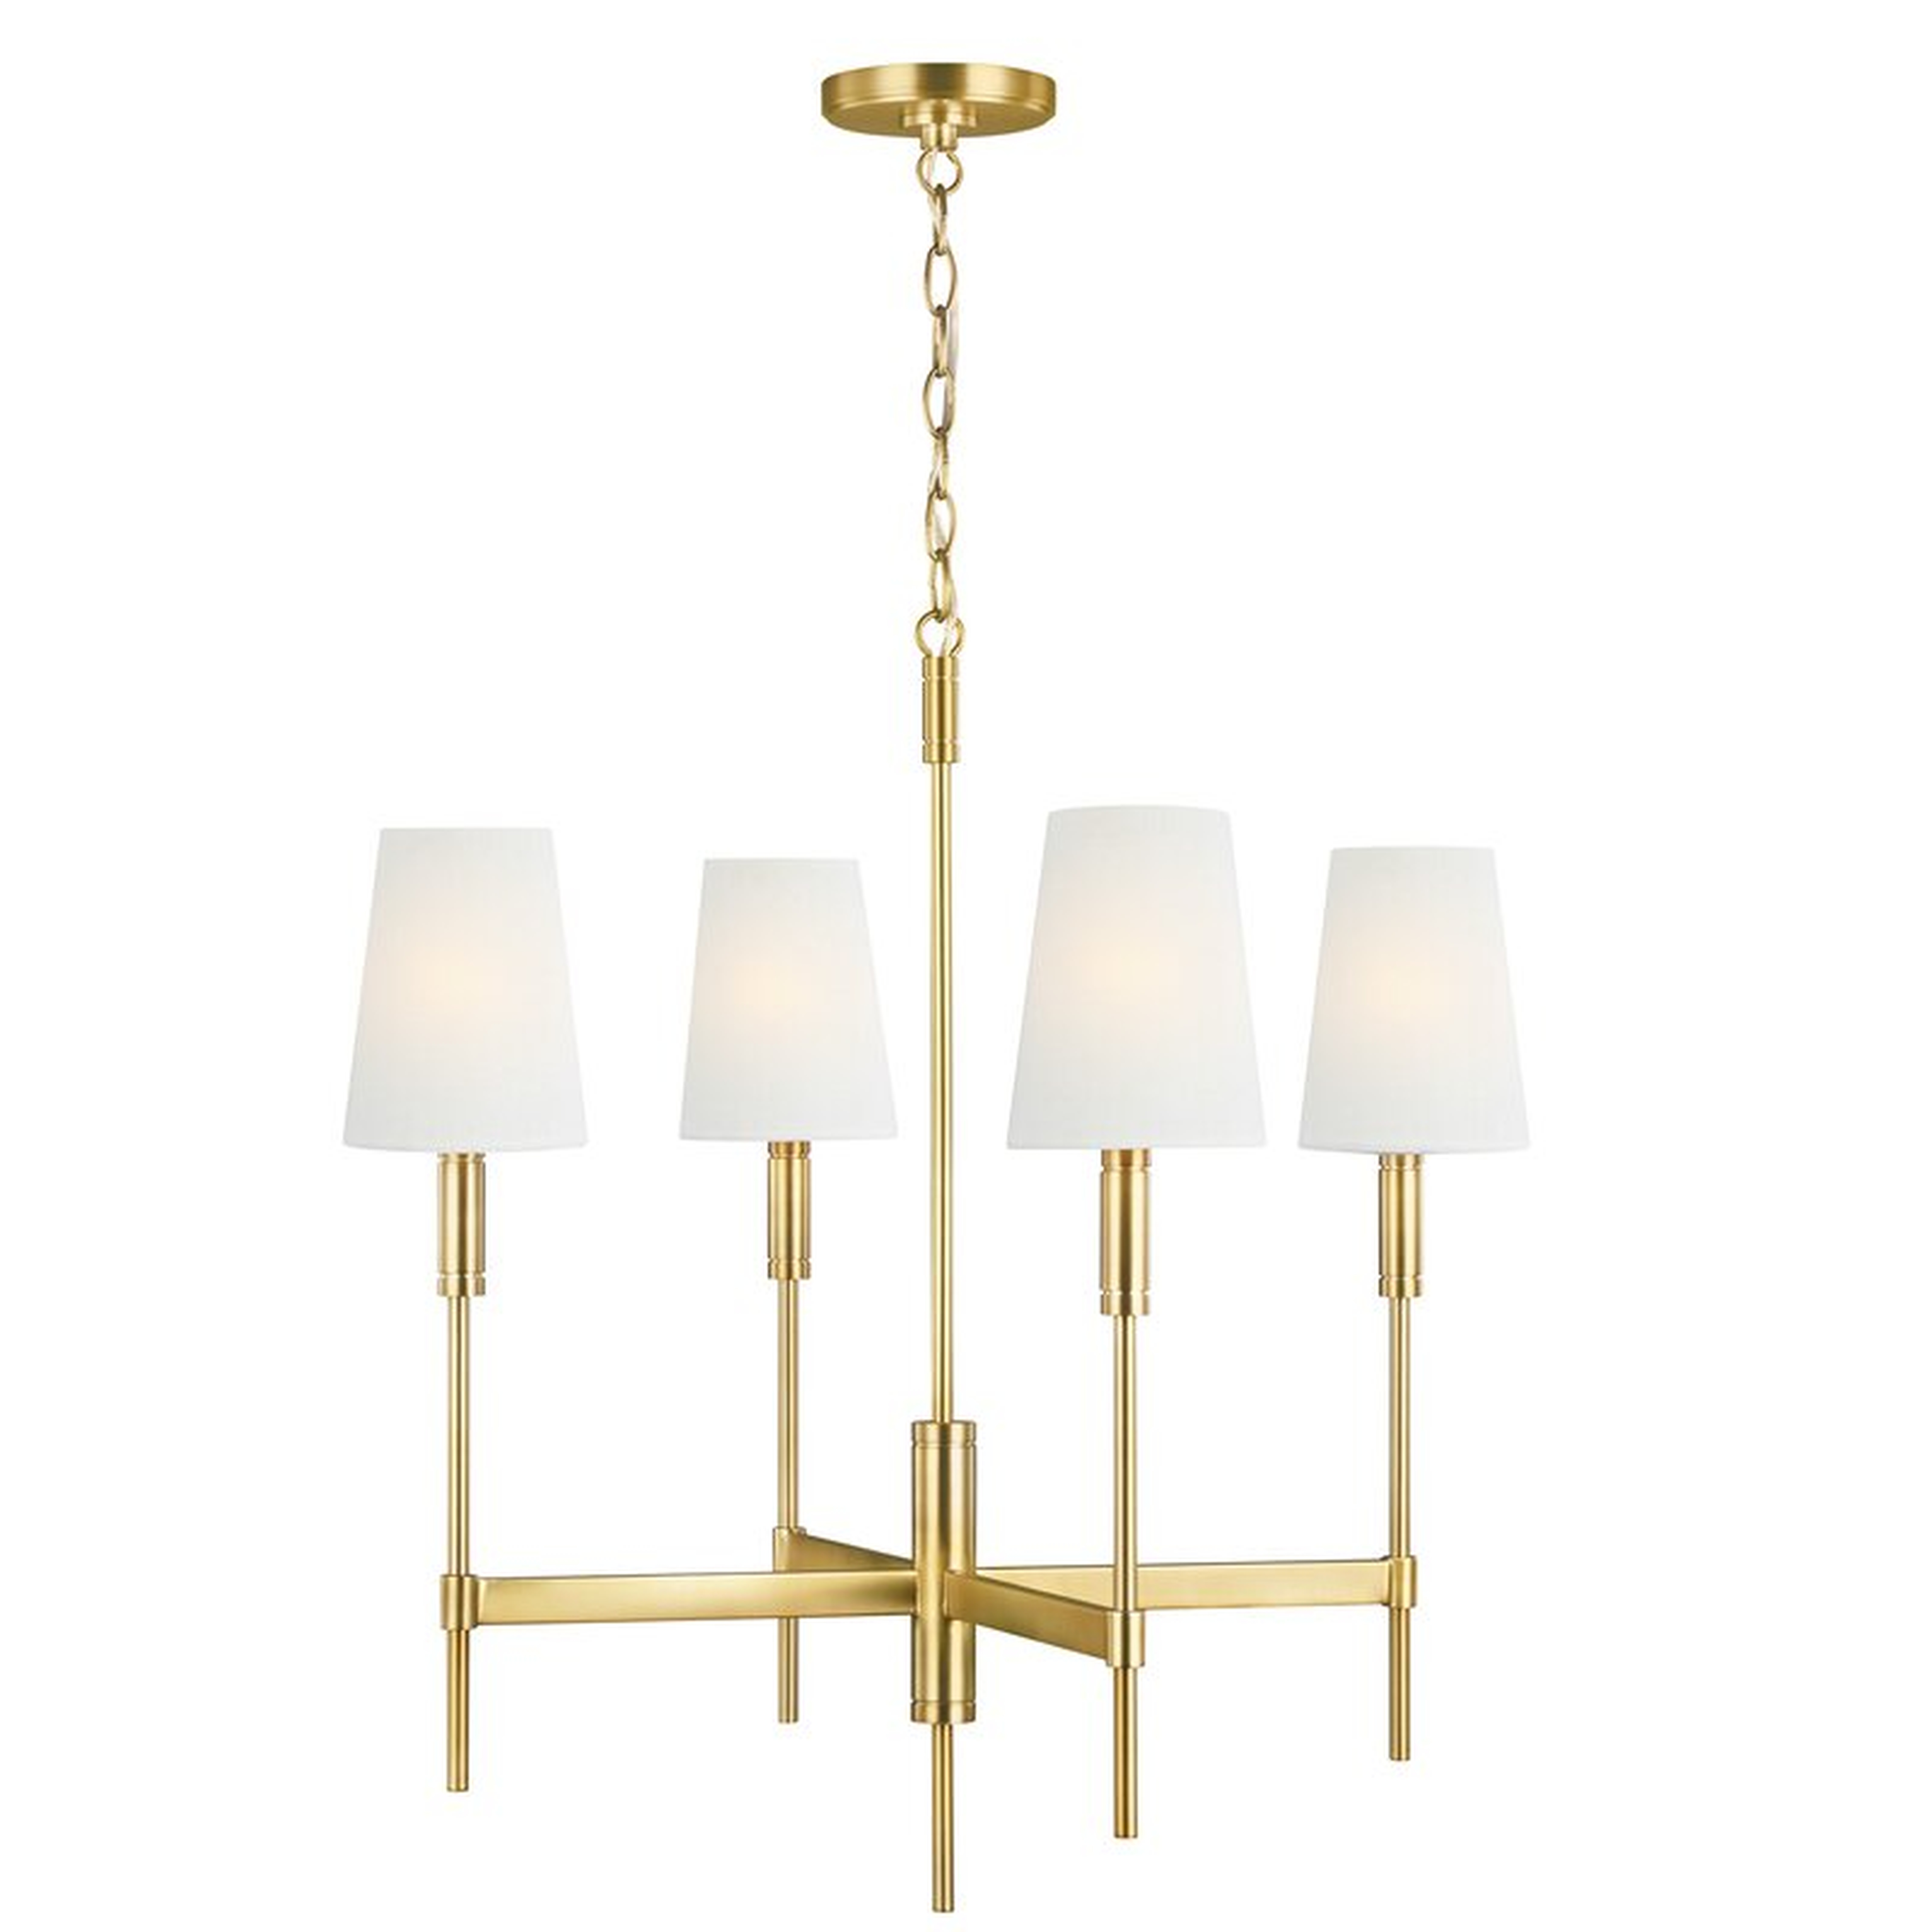 Visual Comfort Studio Beckham 4 - Light Shaded Classic / Traditional Chandelier by Thomas O'Brien - Perigold